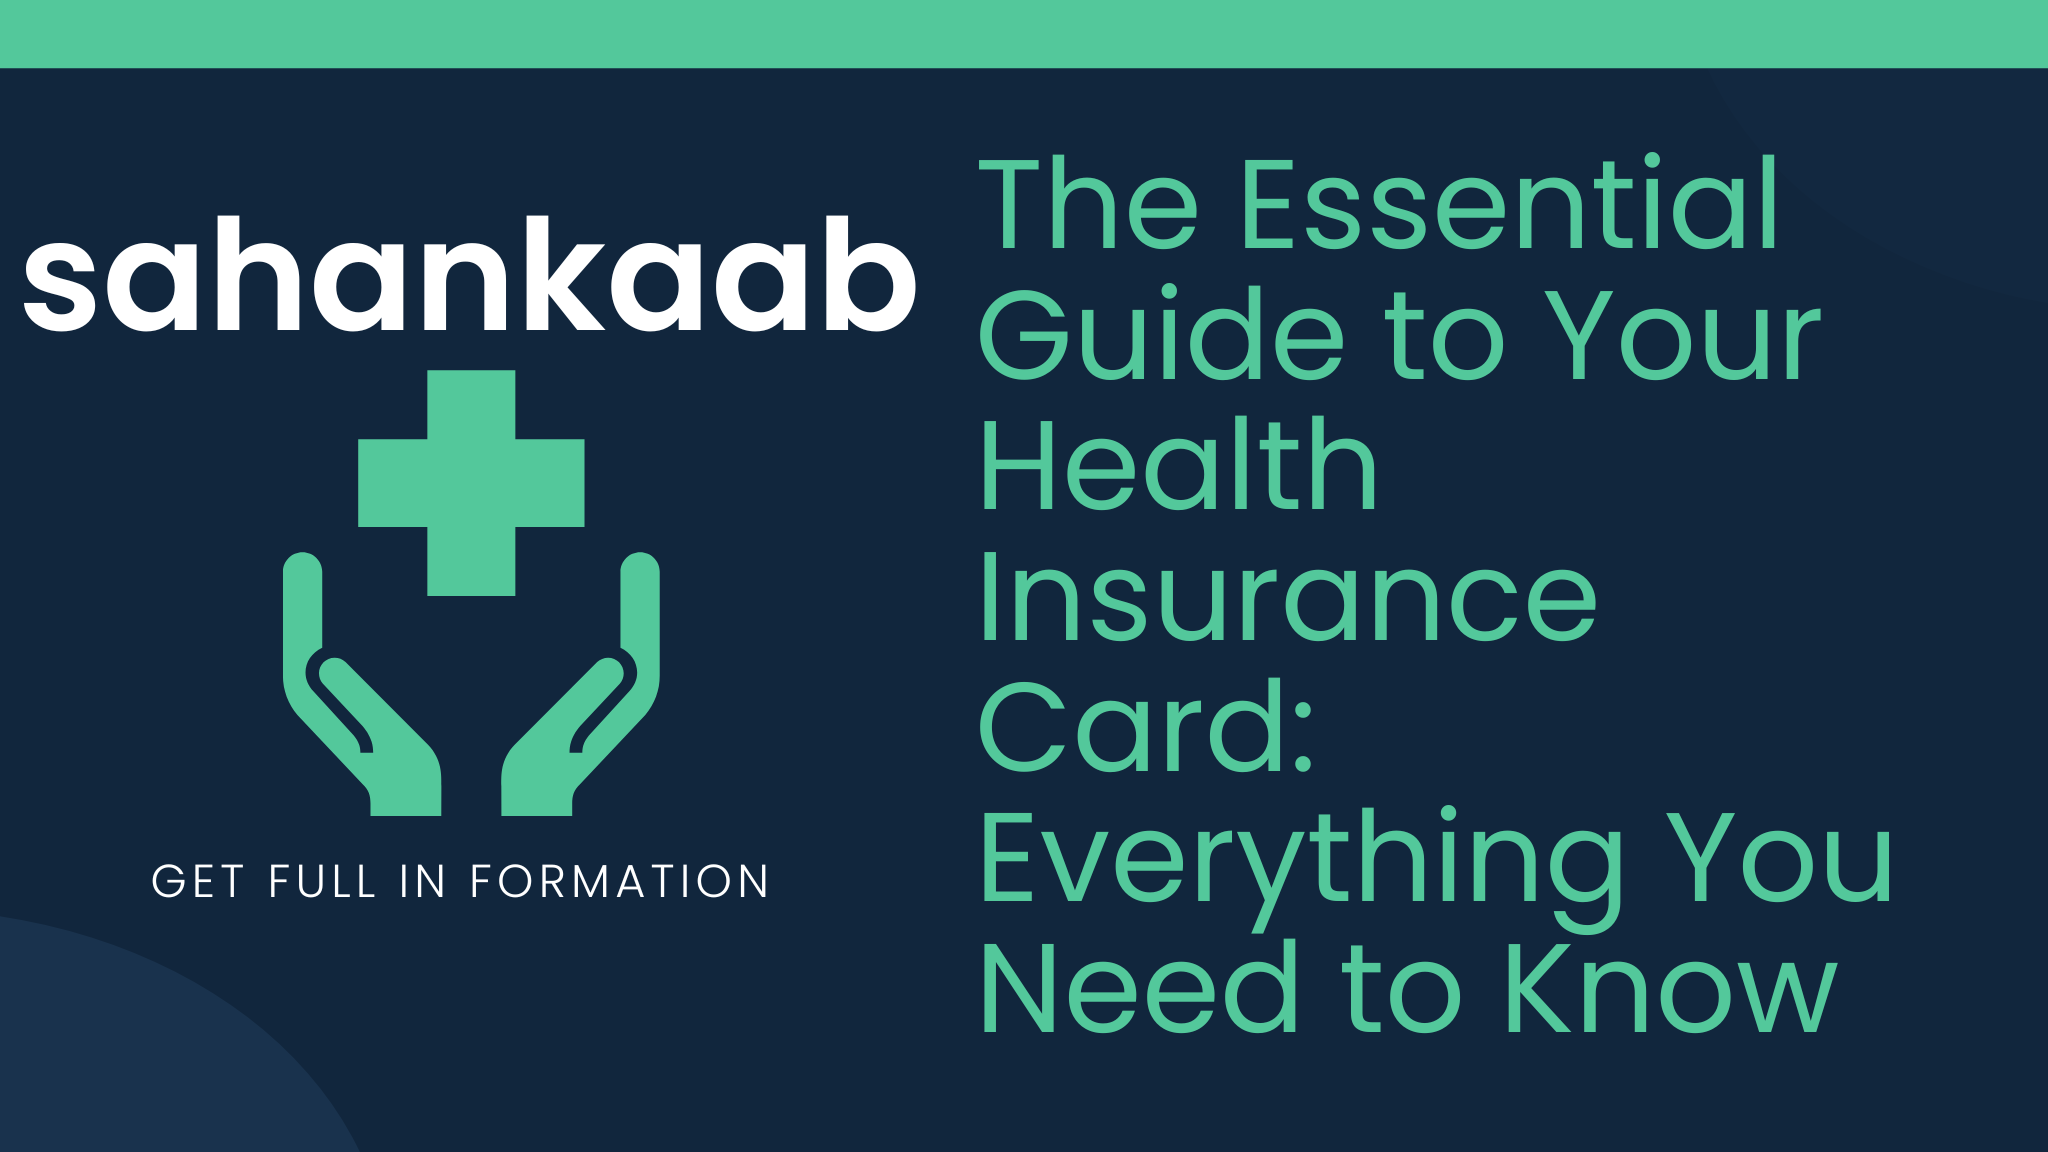 The Essential Guide to Your Health Insurance Card: Everything You Need to Know